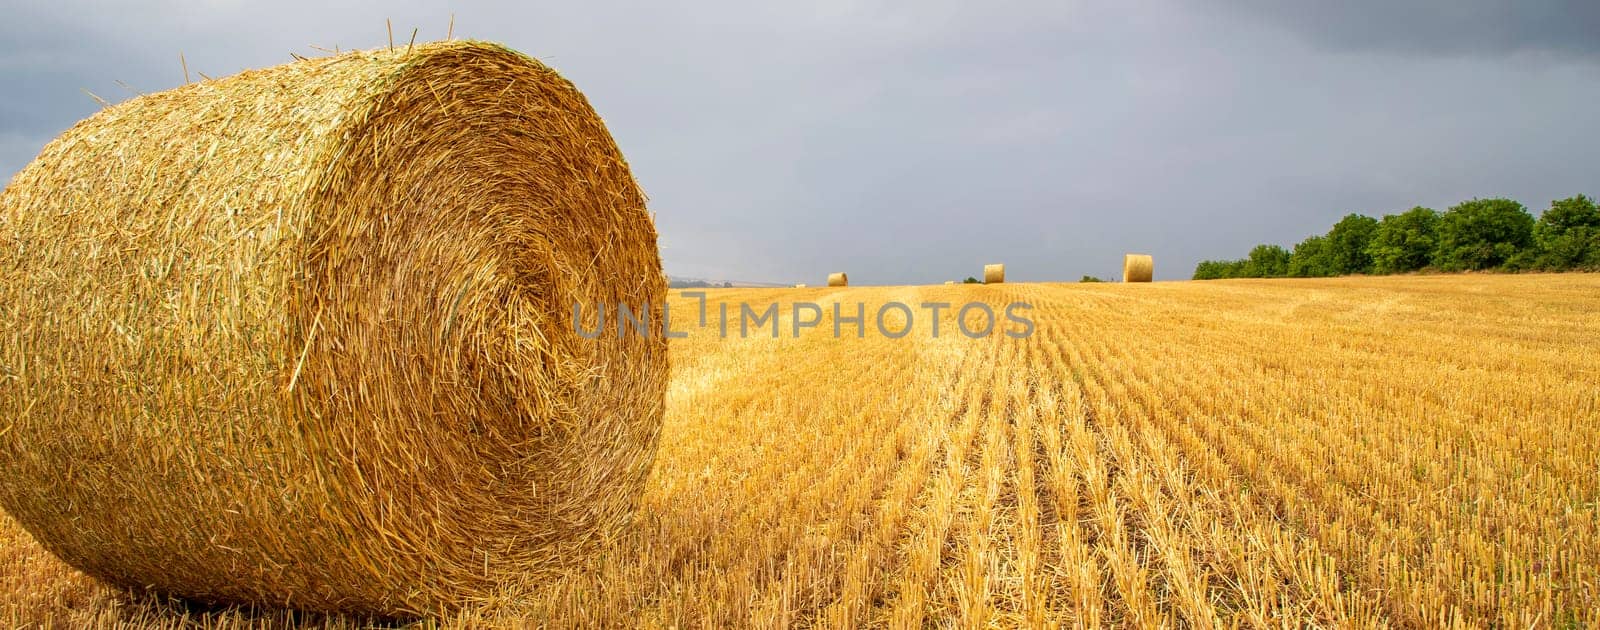 Panoramic view of big bales of hay on the field after harvest